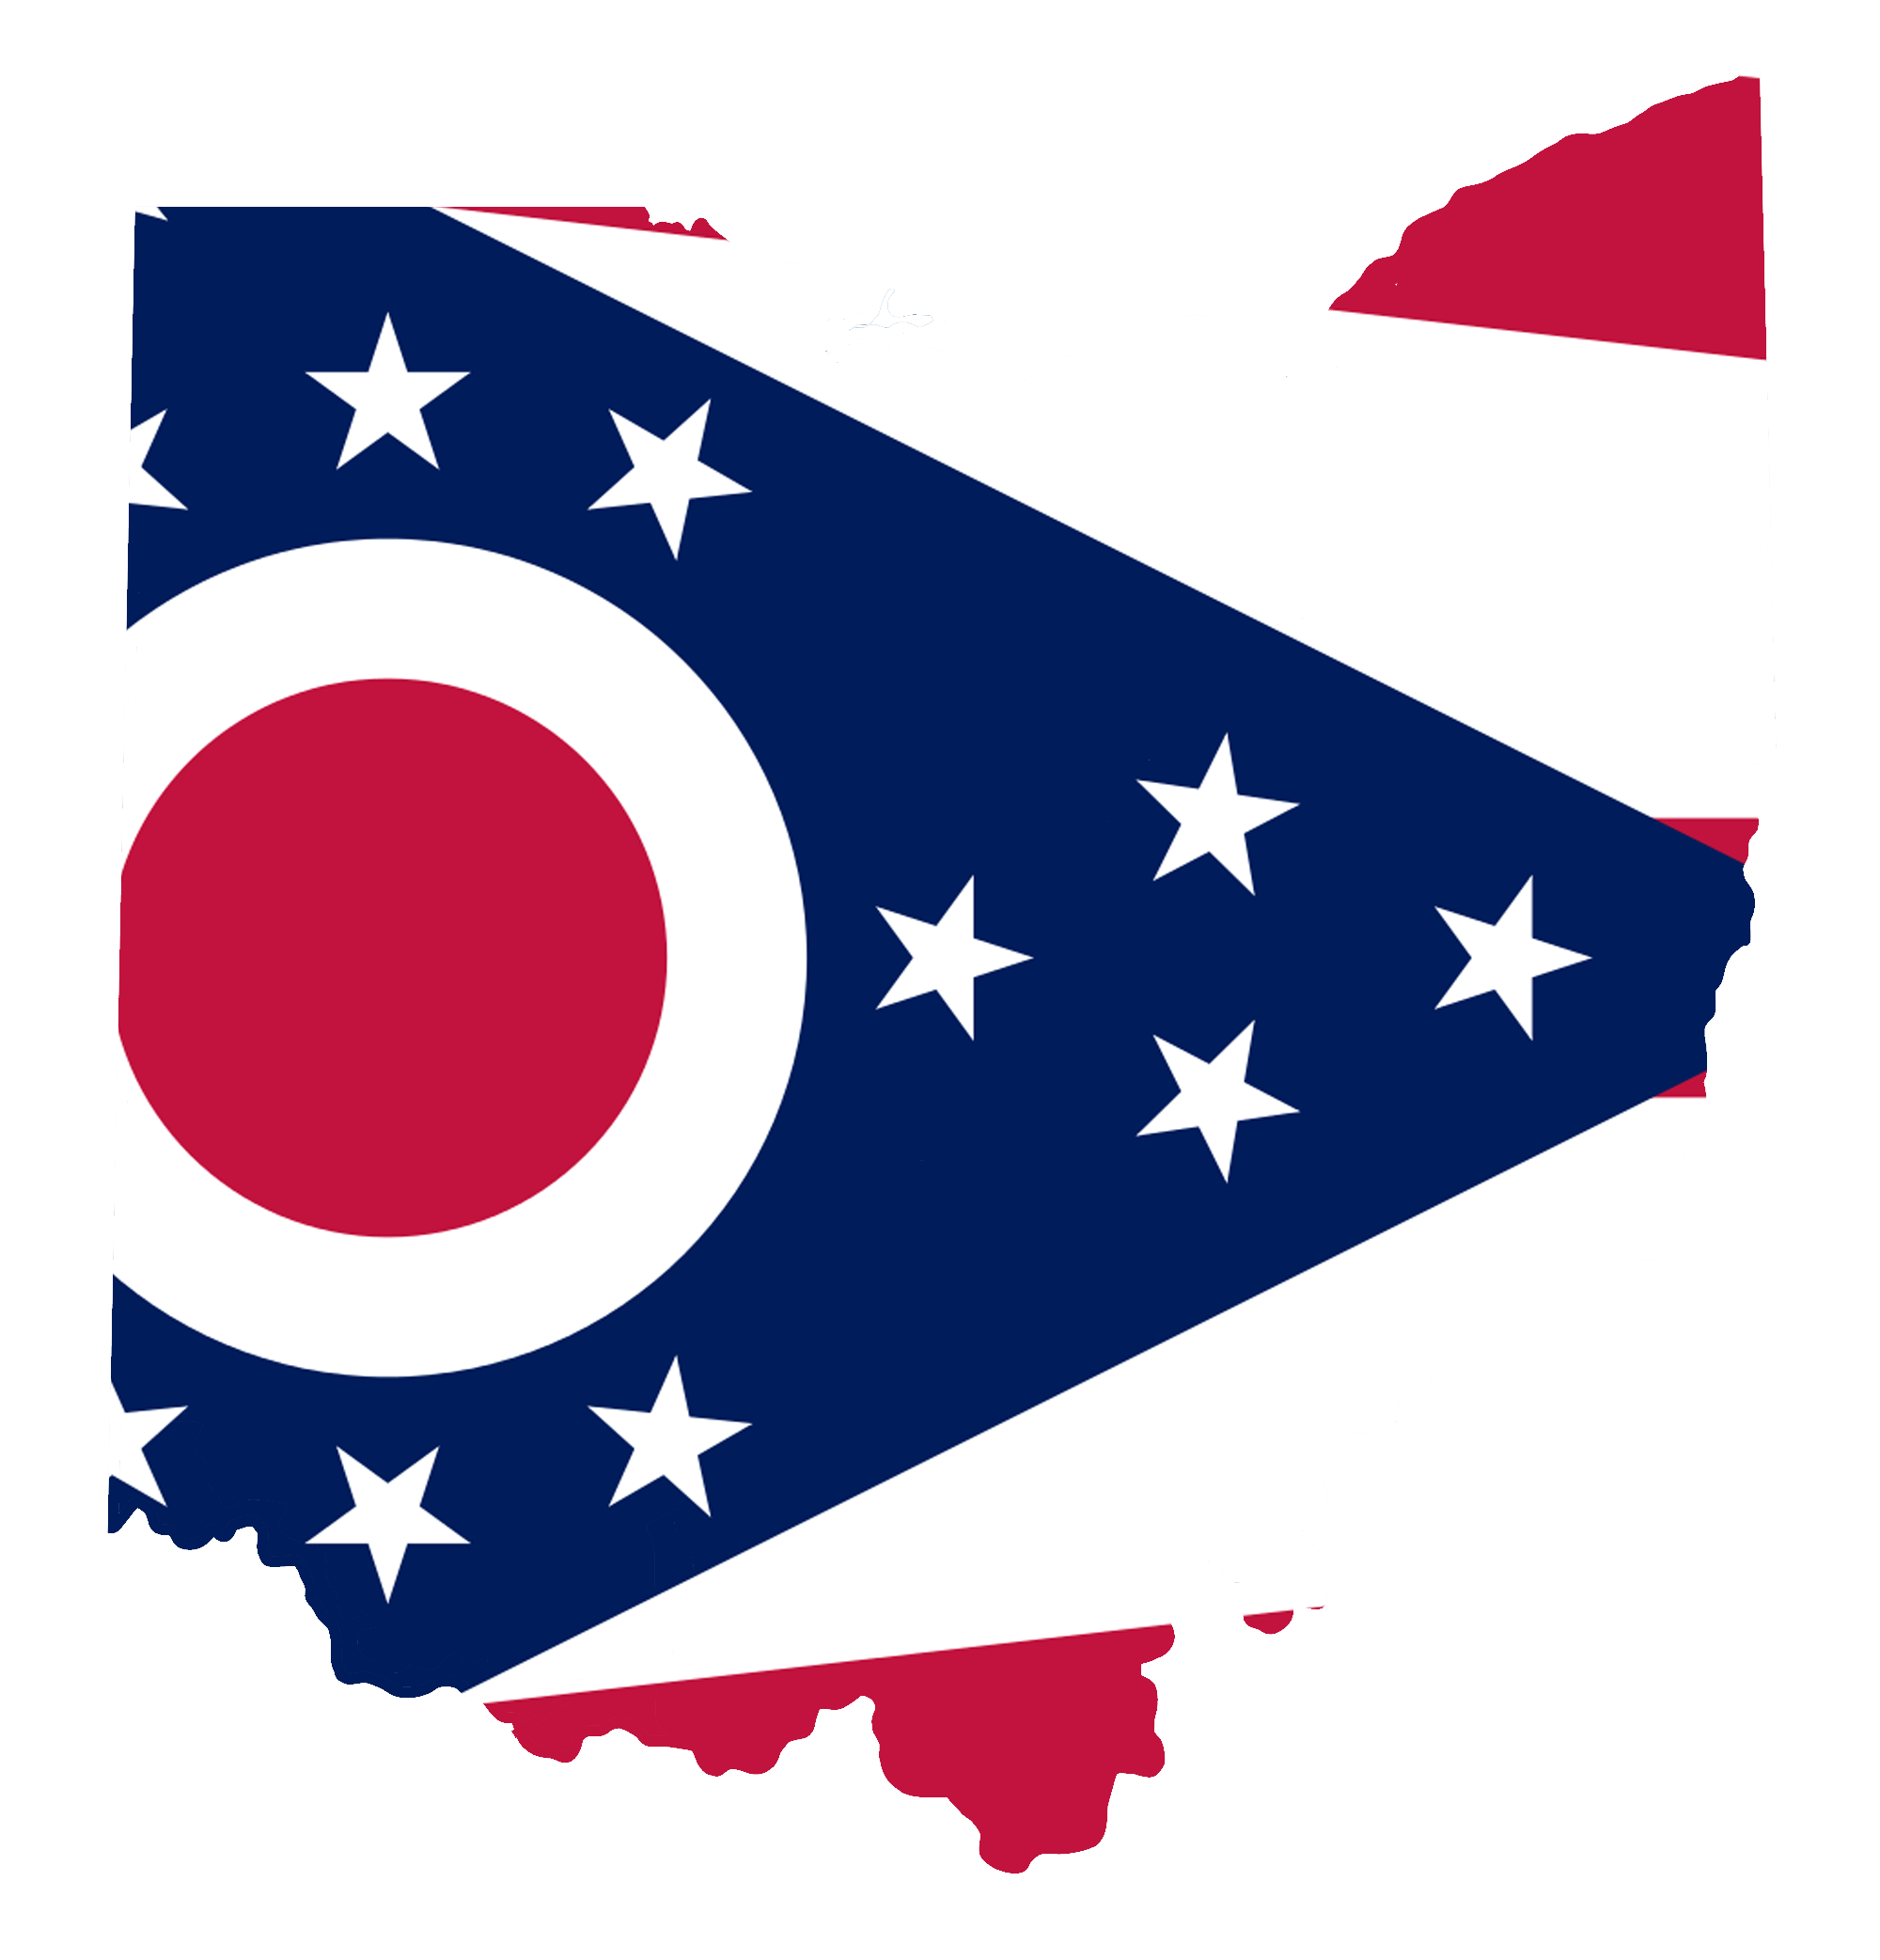 Outline of ohio state with ohio state flag within the outline